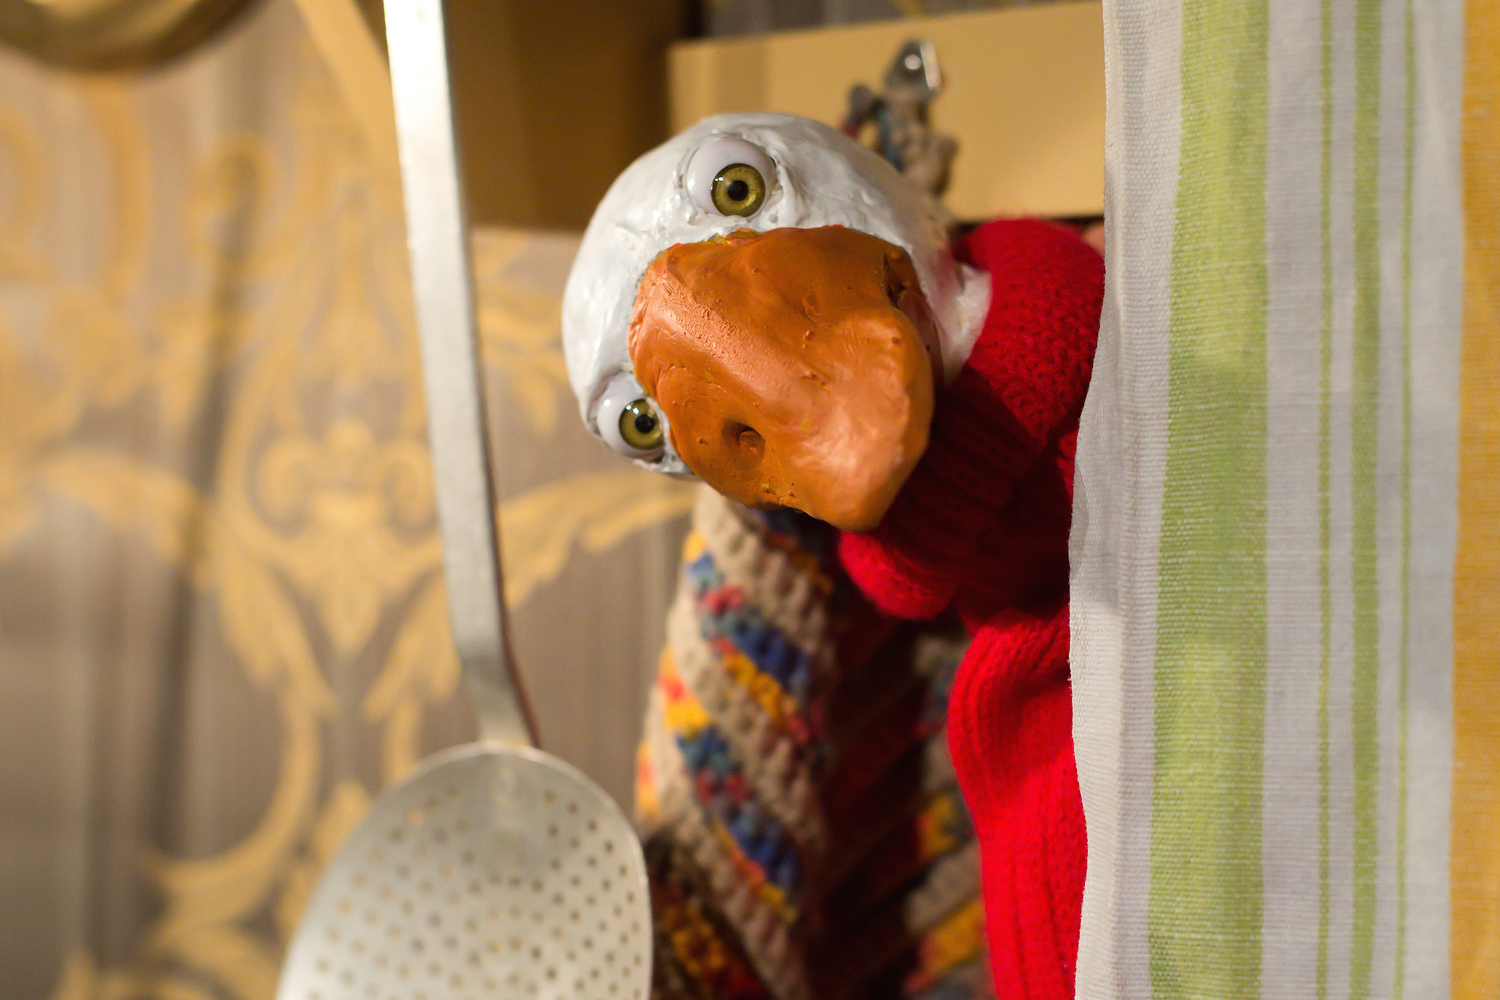 The head of the Christmas goose Auguste looks out from behind a striped forehand. She looks friendly to the camera and wears a red knitted sweater. A pasta strainer hangs in the background.